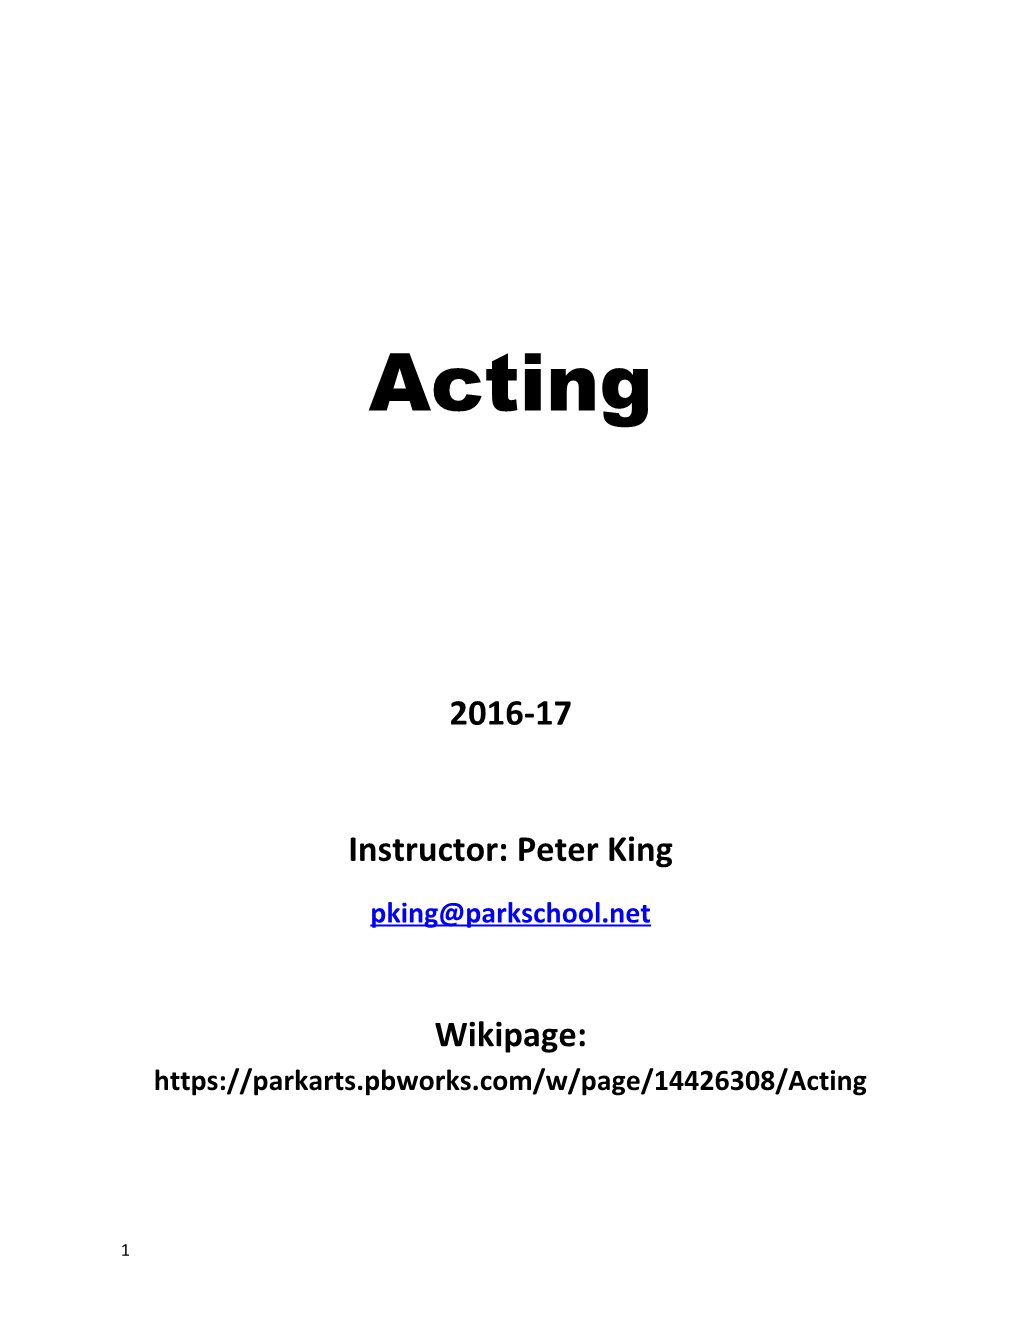 Instructor: Peter King